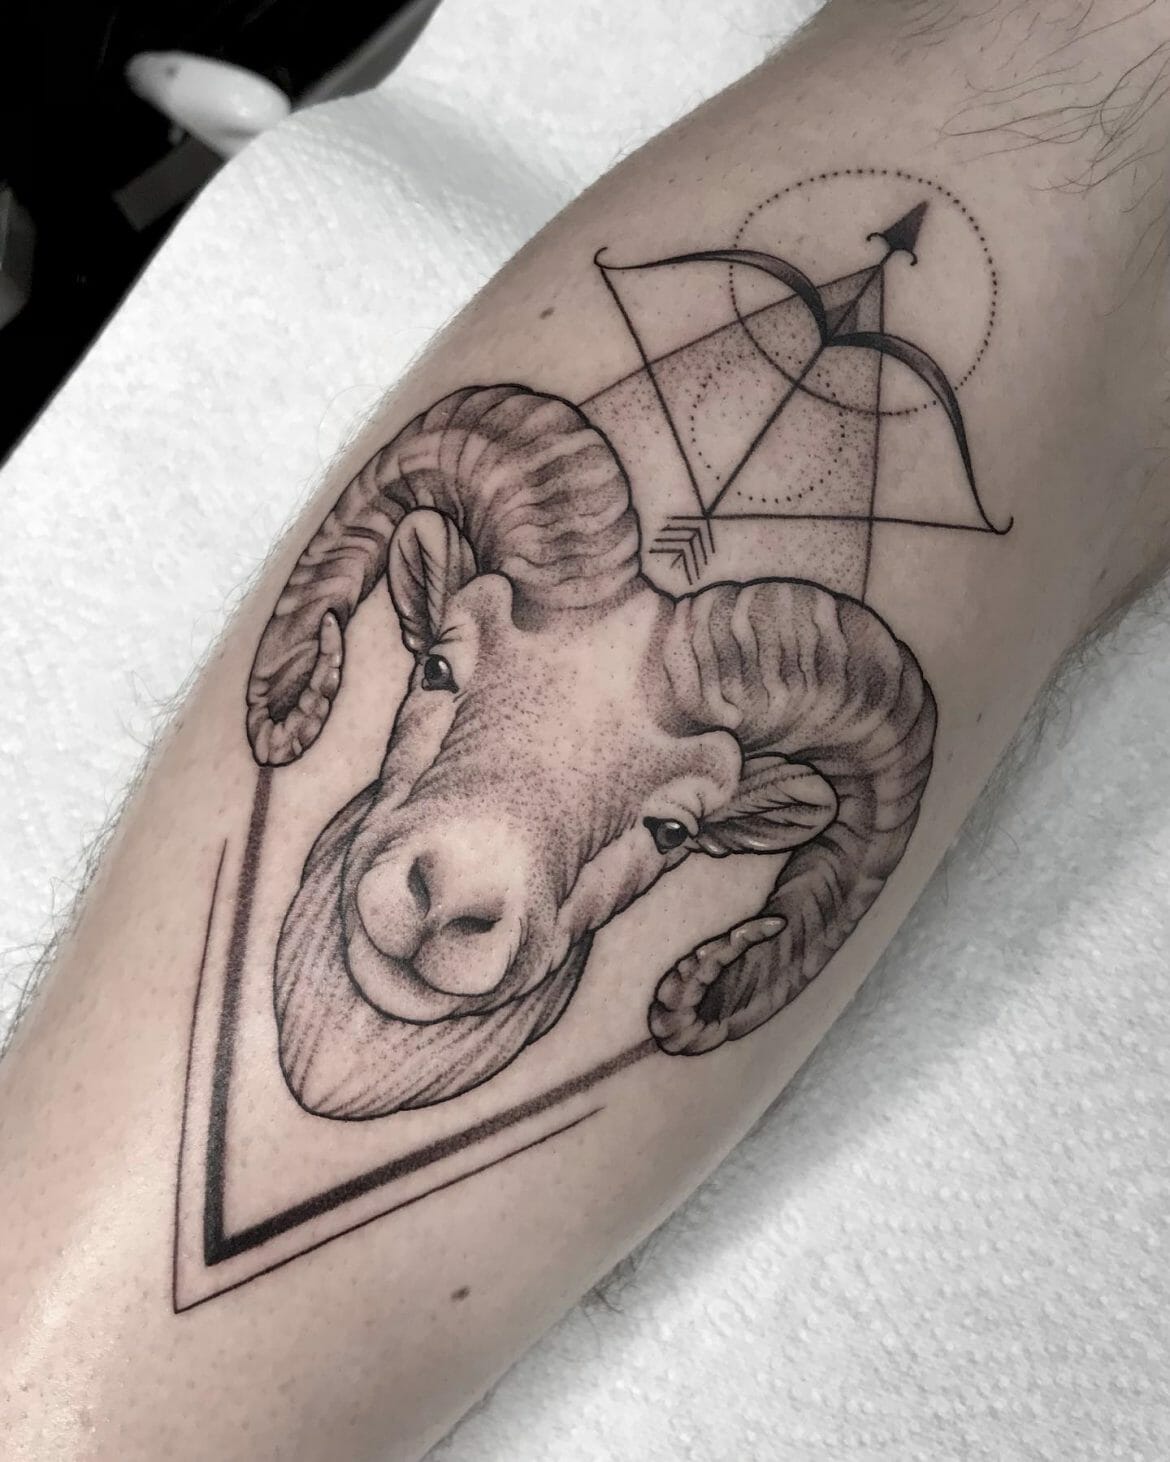 101 Best Sagittarius Tattoo Ideas You Have To See To Believe!